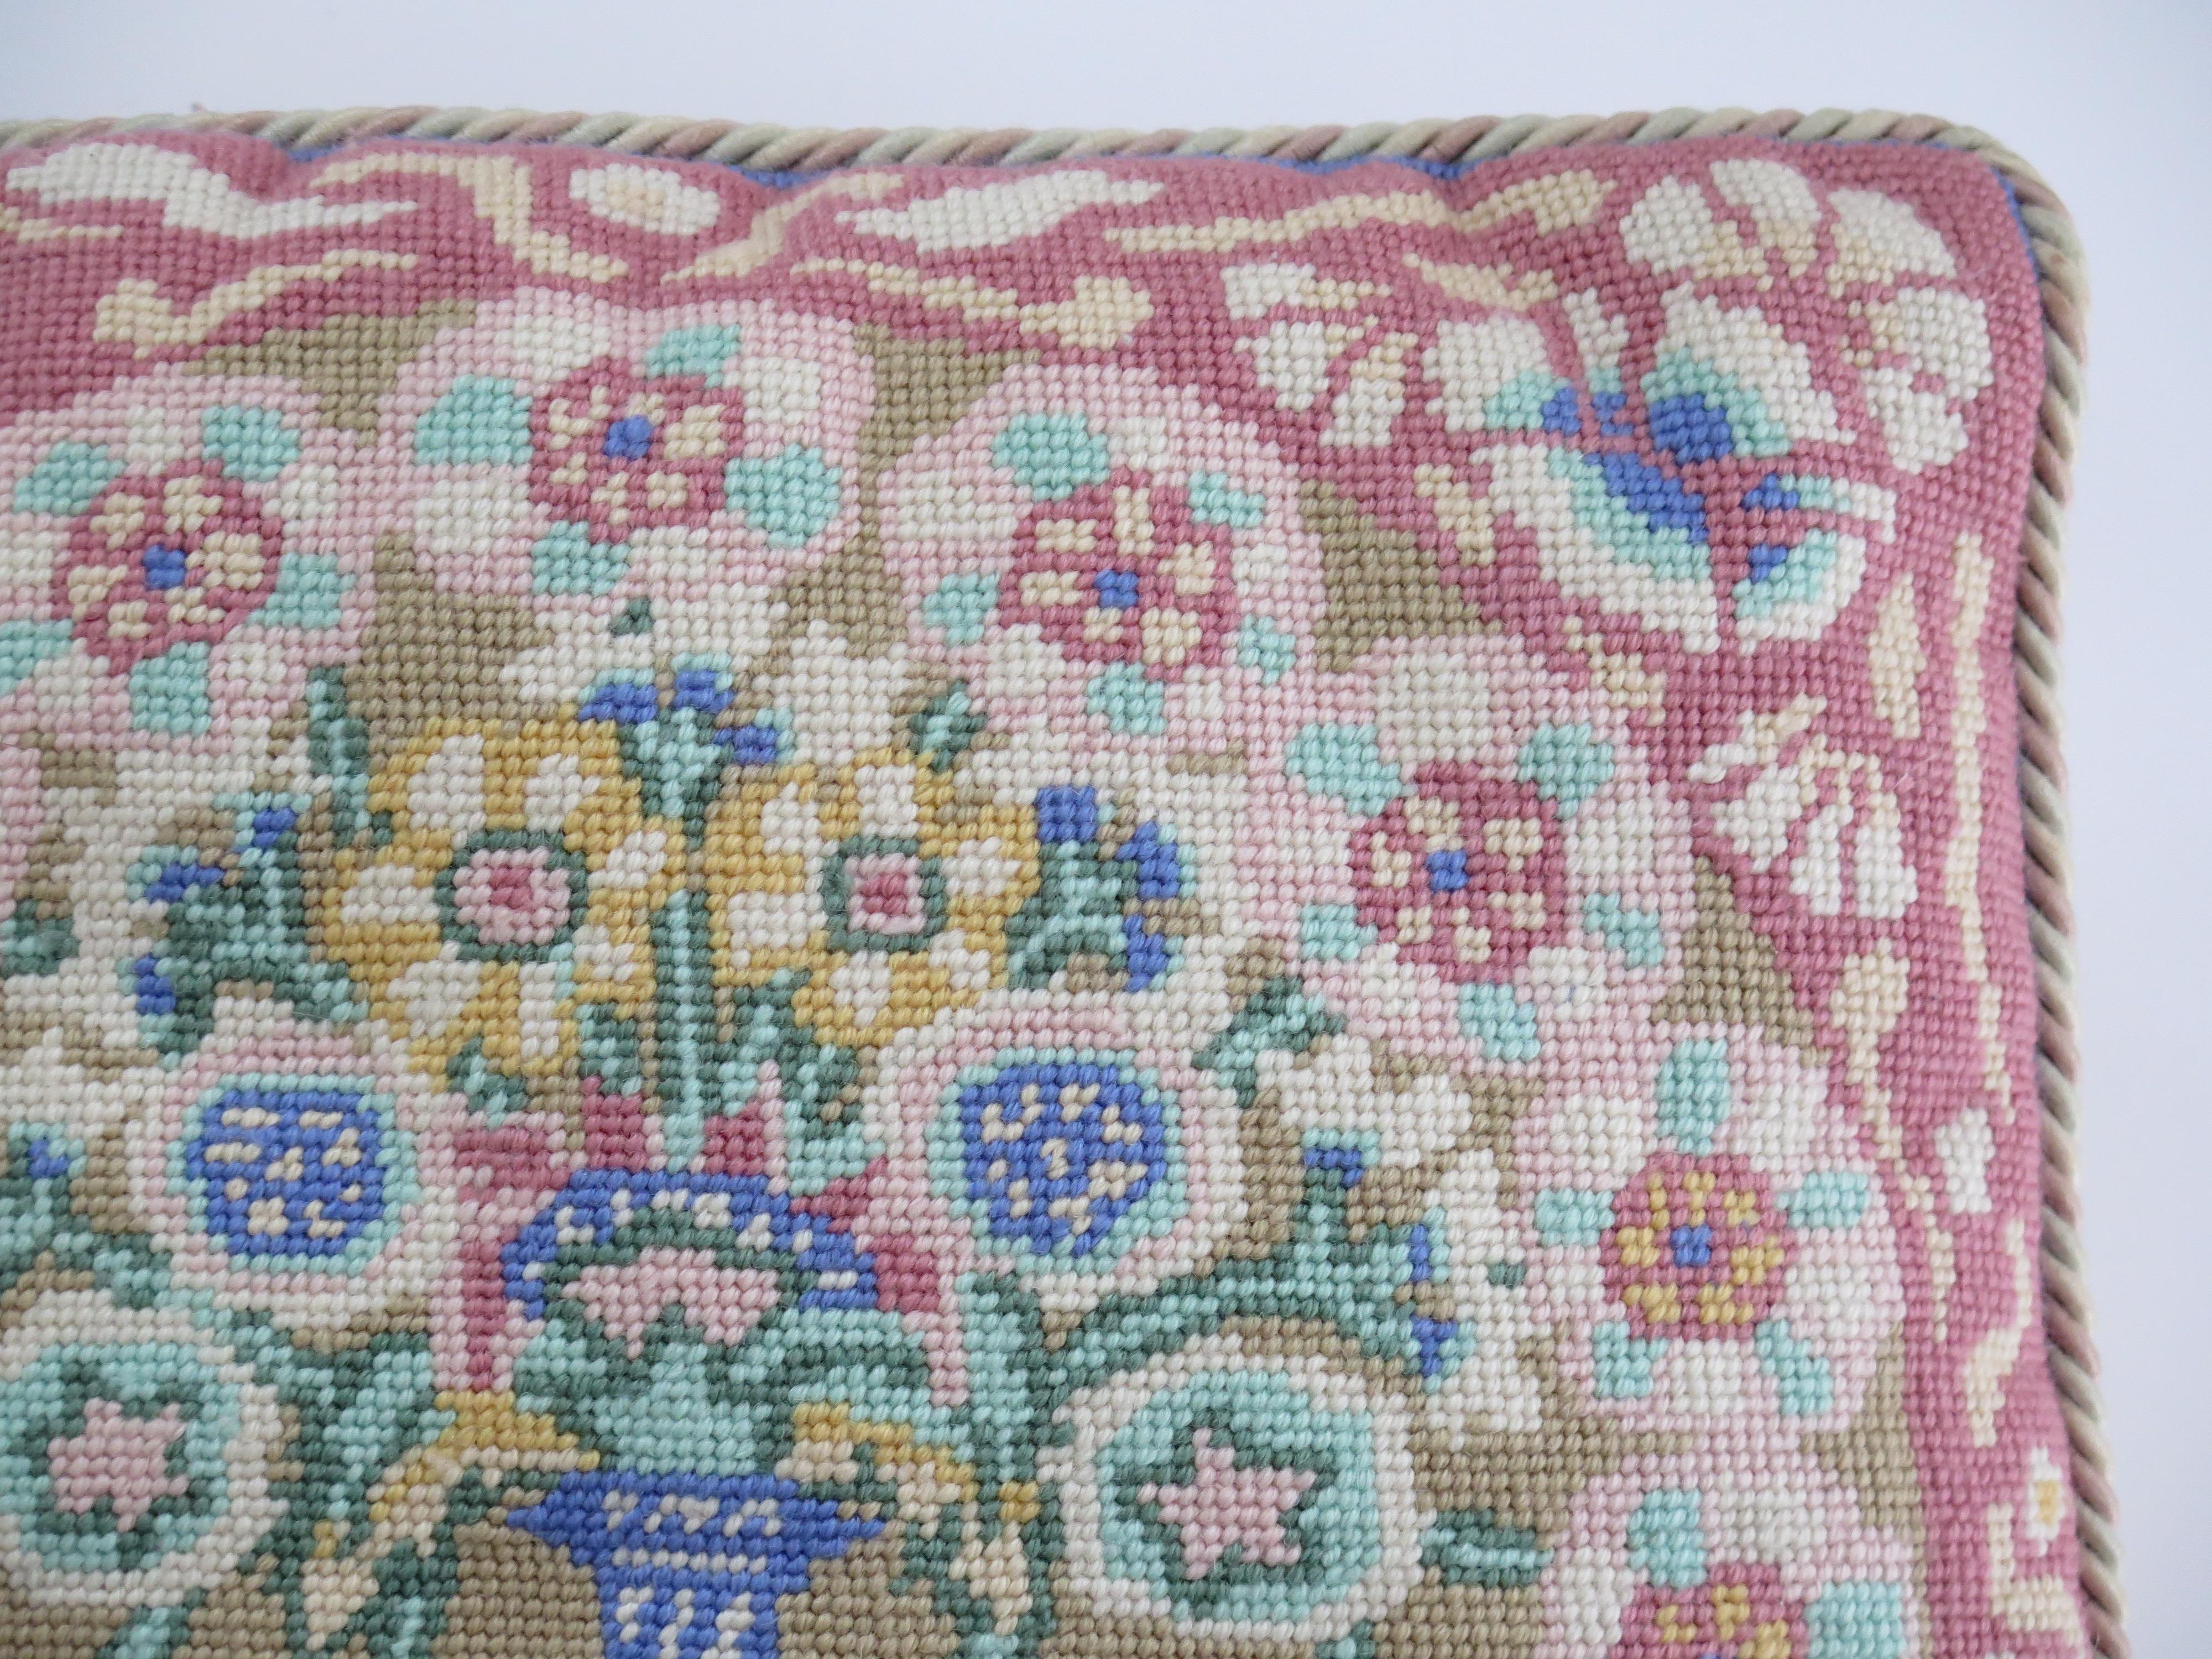 Fabric Woven Cushion or Pillow with Flower Vase pattern in pastel shades, Circa 1930s For Sale